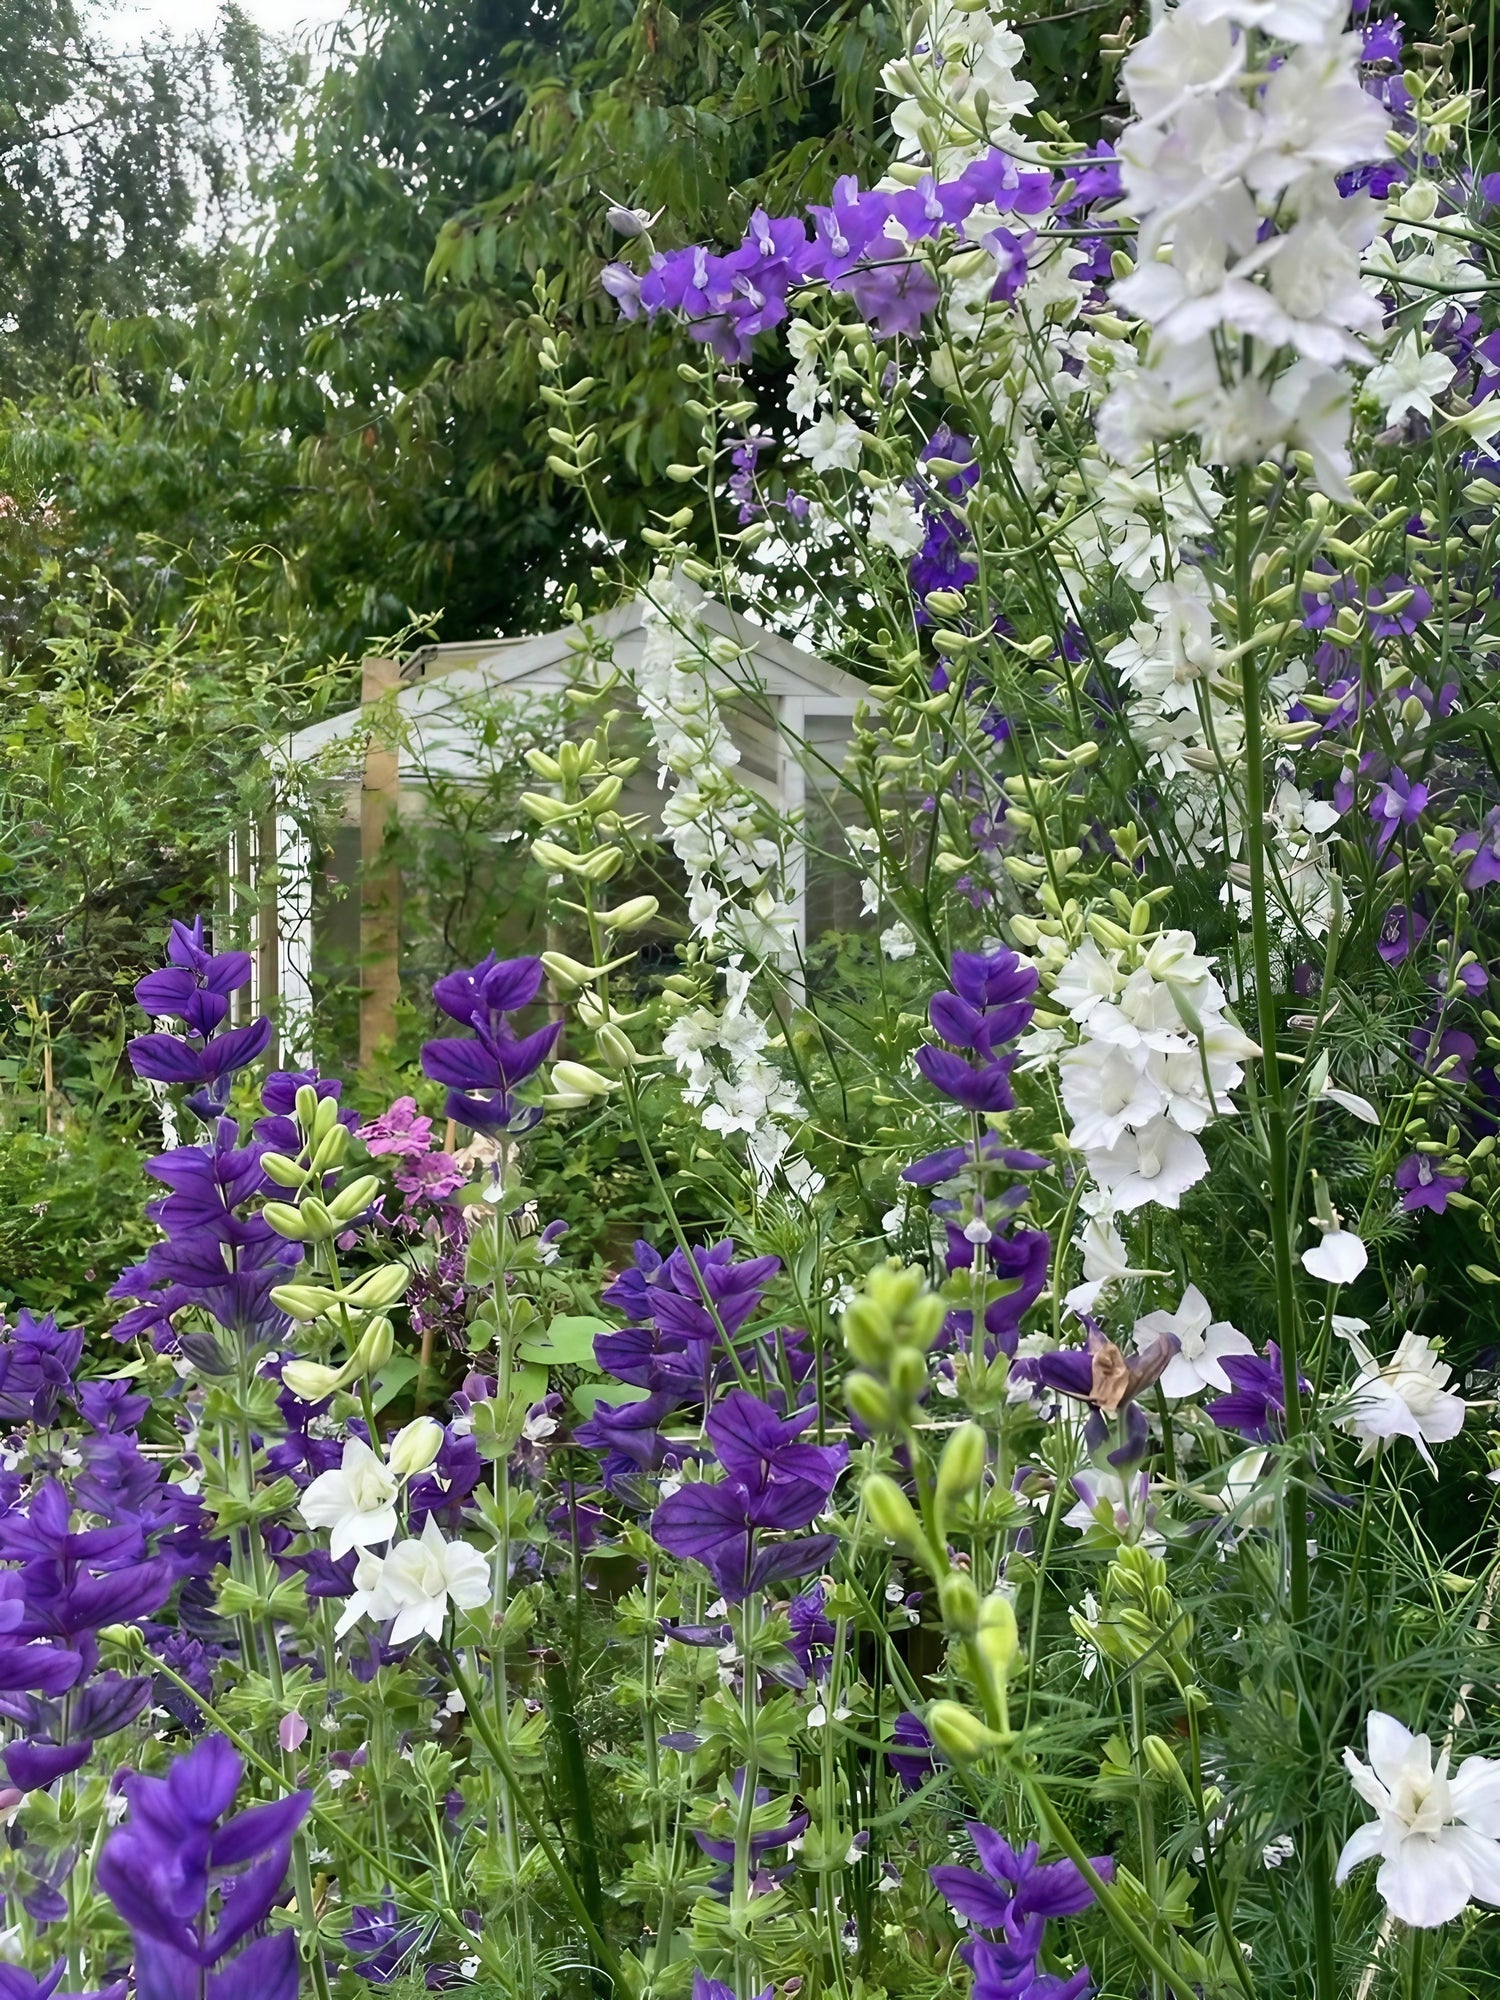 A scenic view of a garden bed filled with Larkspur Giant Imperial Mix flowers